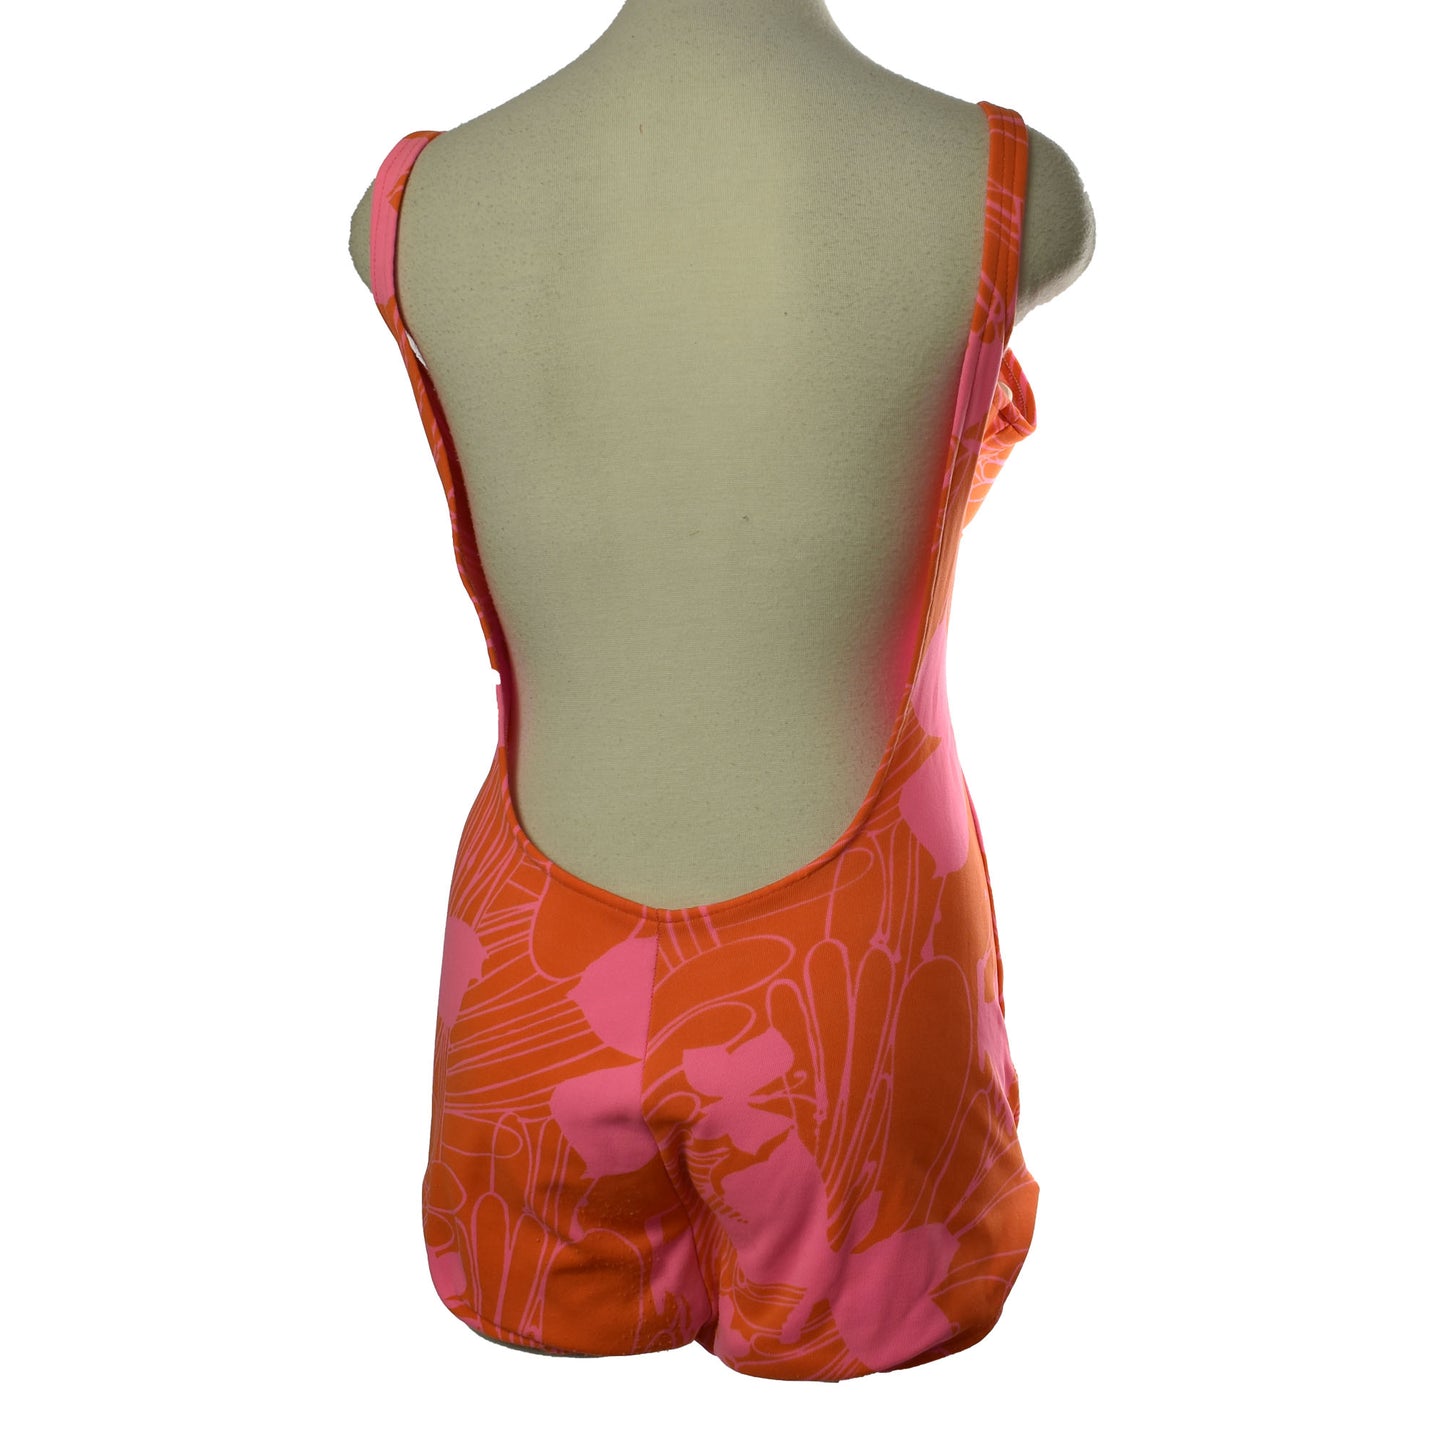 Vintage 1960's Pink and Orange One Piece Jantzen Swimsuit with Open Back, Built in Bra